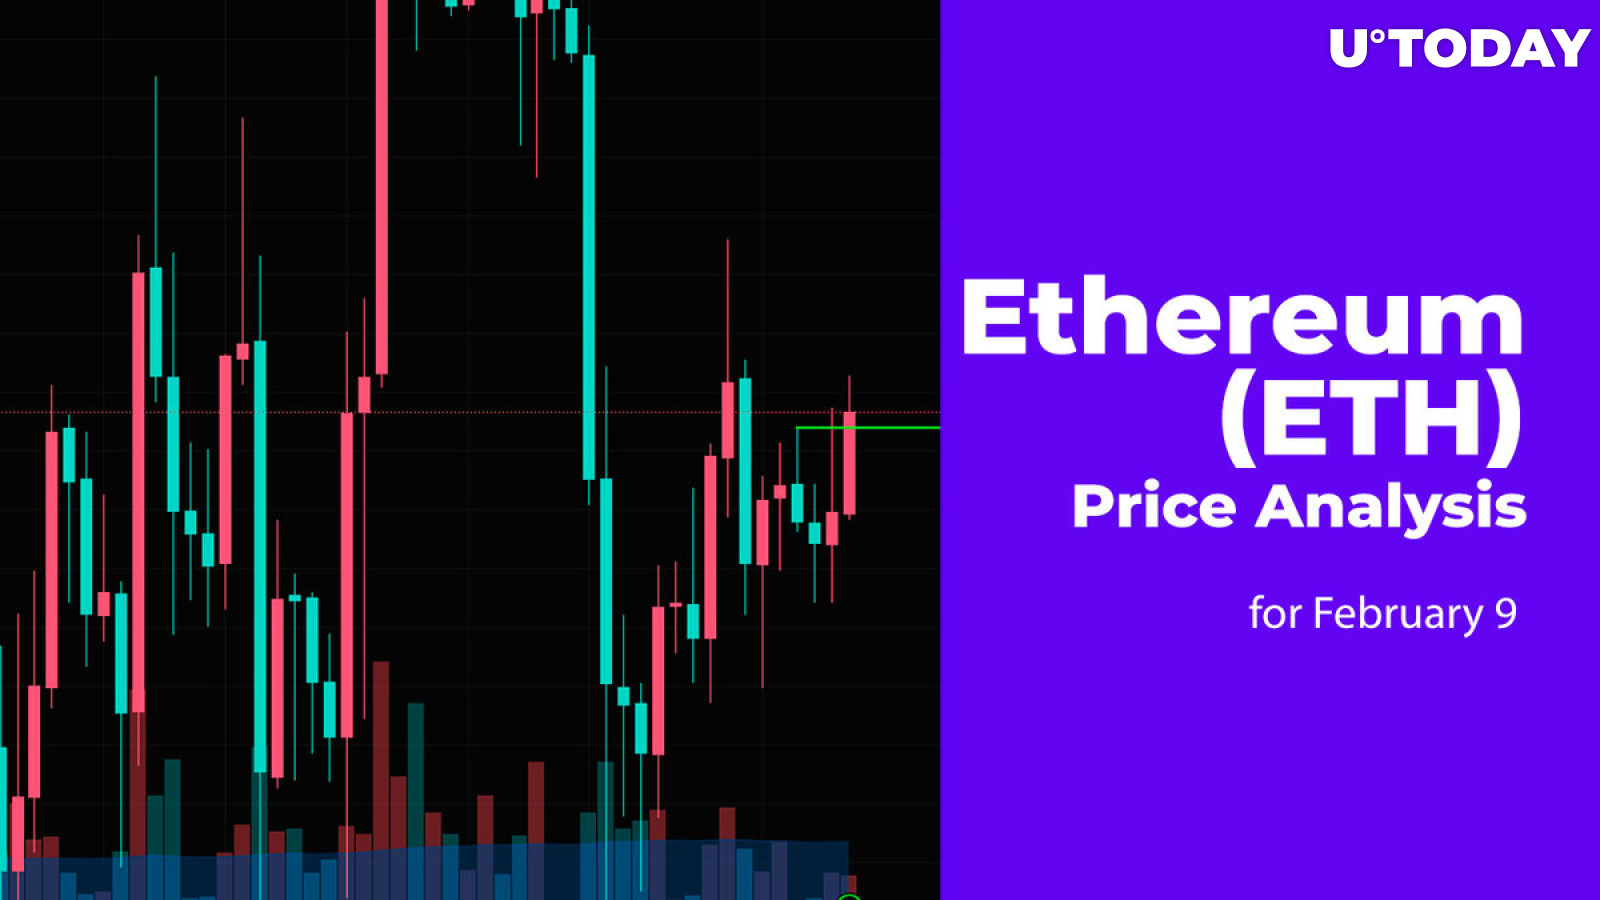 Ethereum (ETH) Price Prediction for February 9